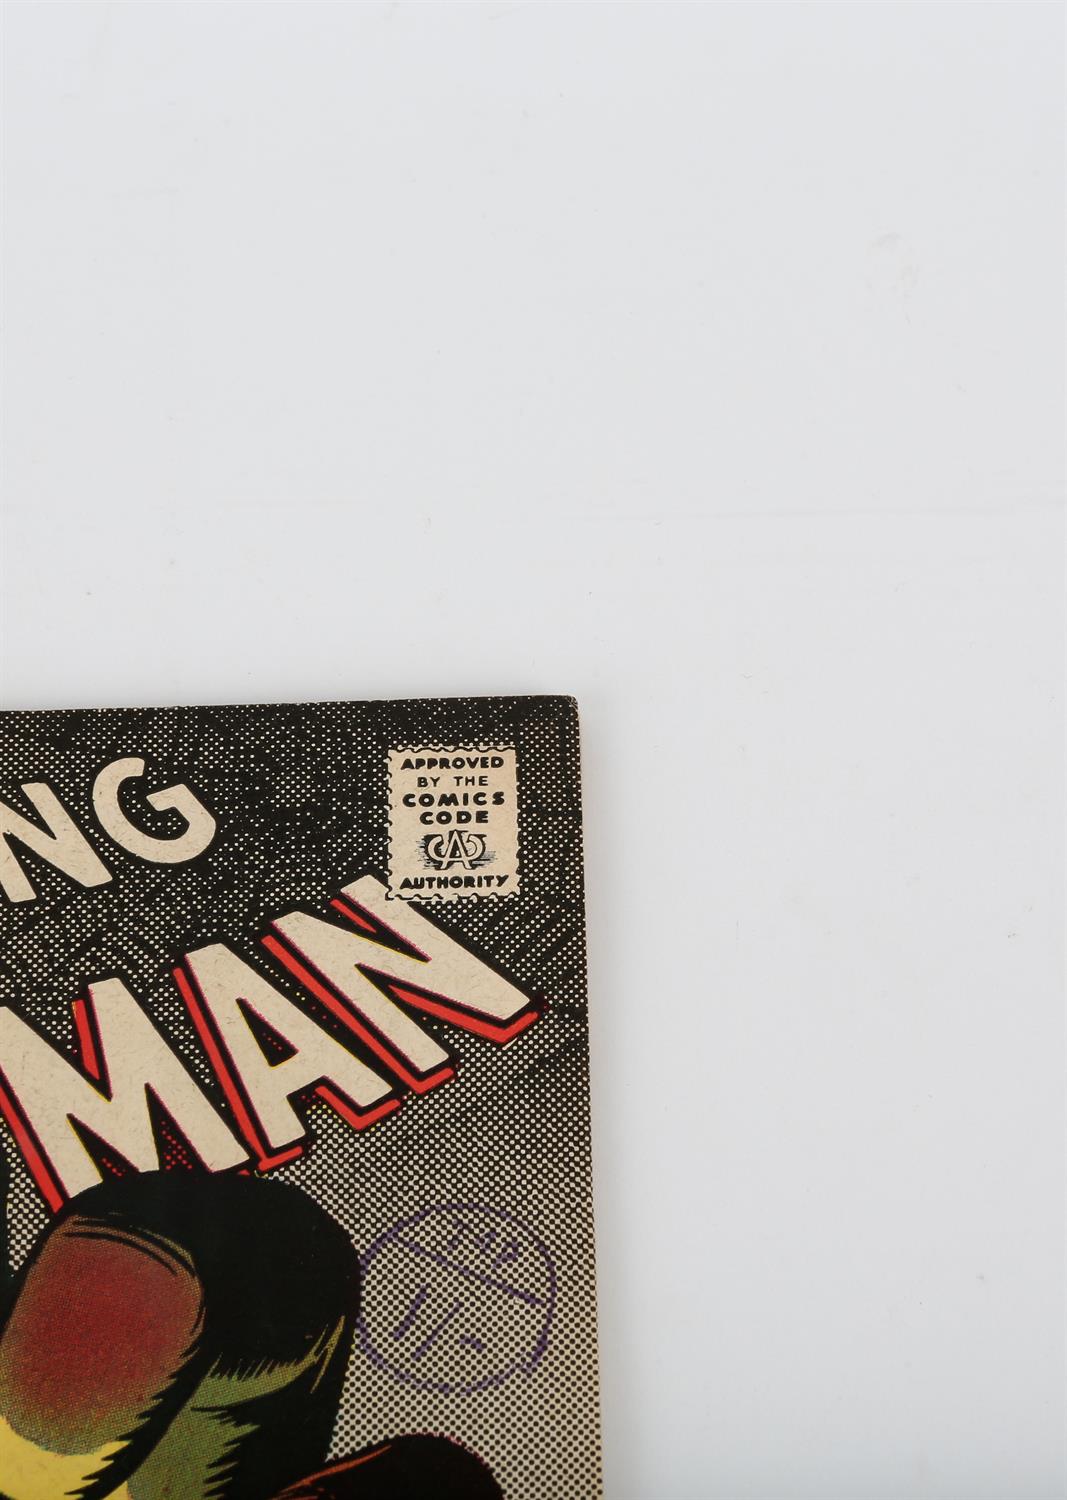 Marvel Comics: The Amazing Spider-Man No. 67 featuring the 1st appearance of Randy Robertson (1968). - Image 6 of 10